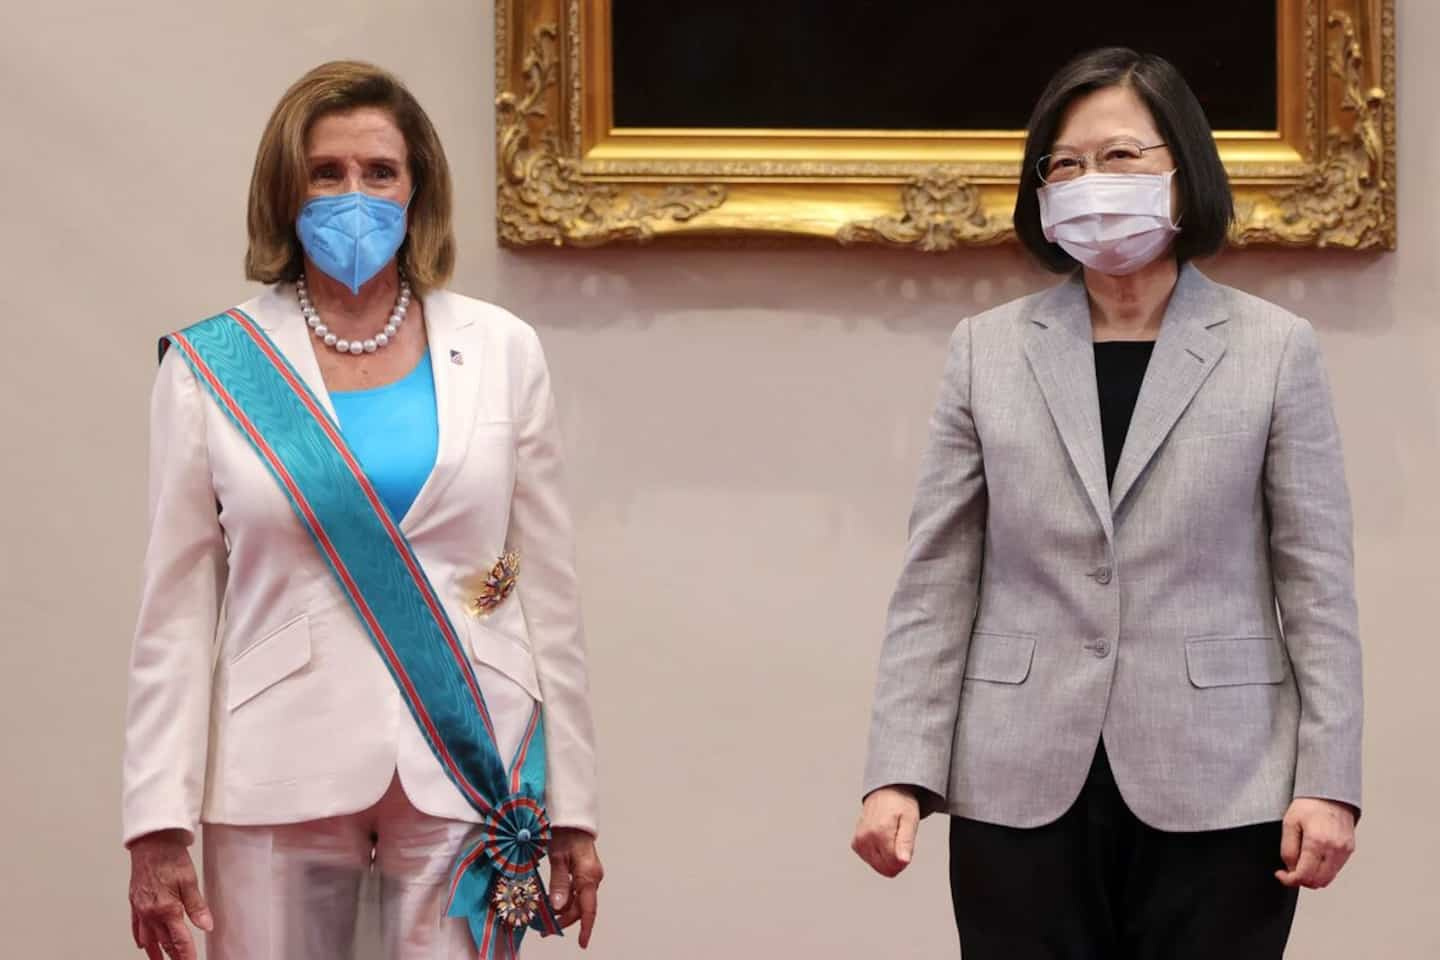 Pelosi visit: Taiwan “will not back down” in the face of Chinese threat, says its president